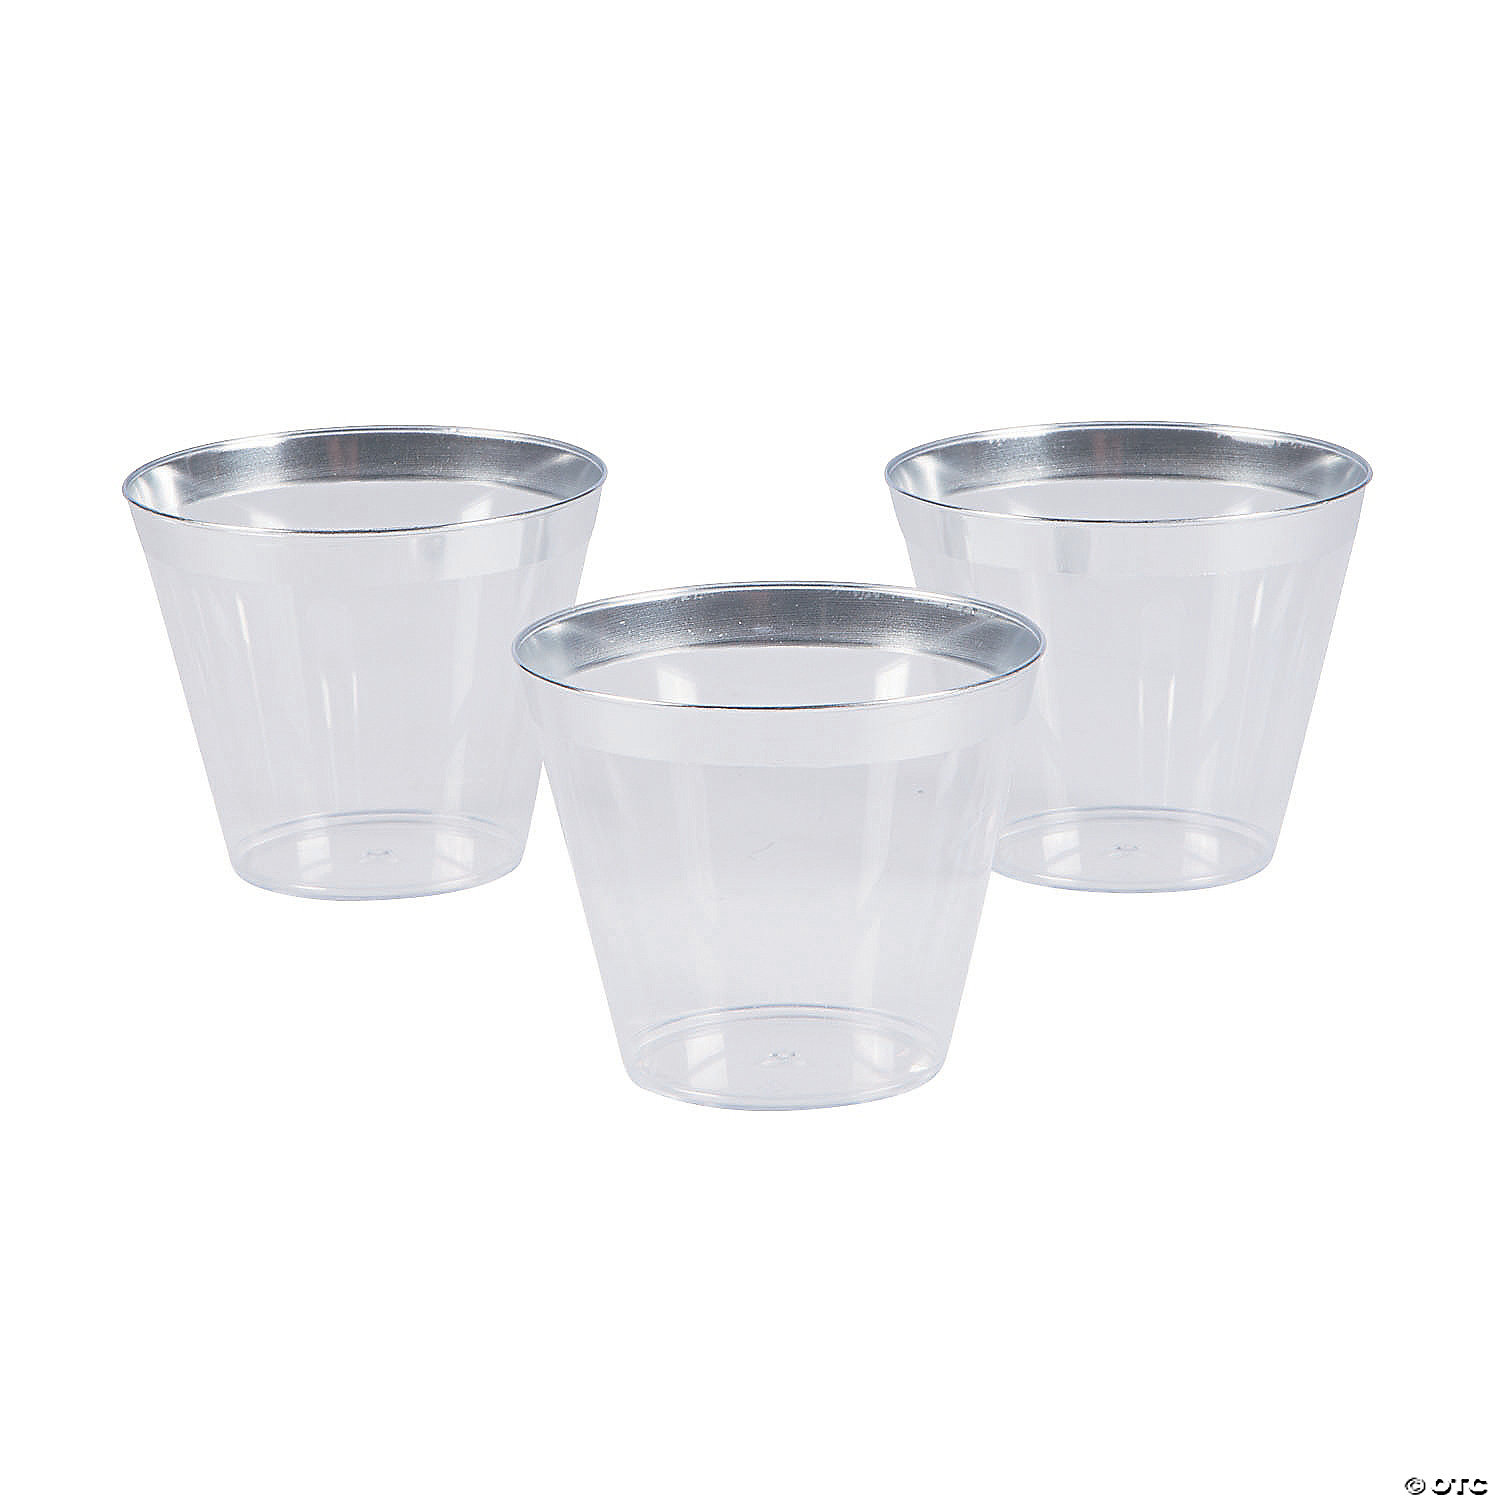 https://s7.orientaltrading.com/is/image/OrientalTrading/VIEWER_ZOOM/small-plastic-cups-with-silver-trim~13815029